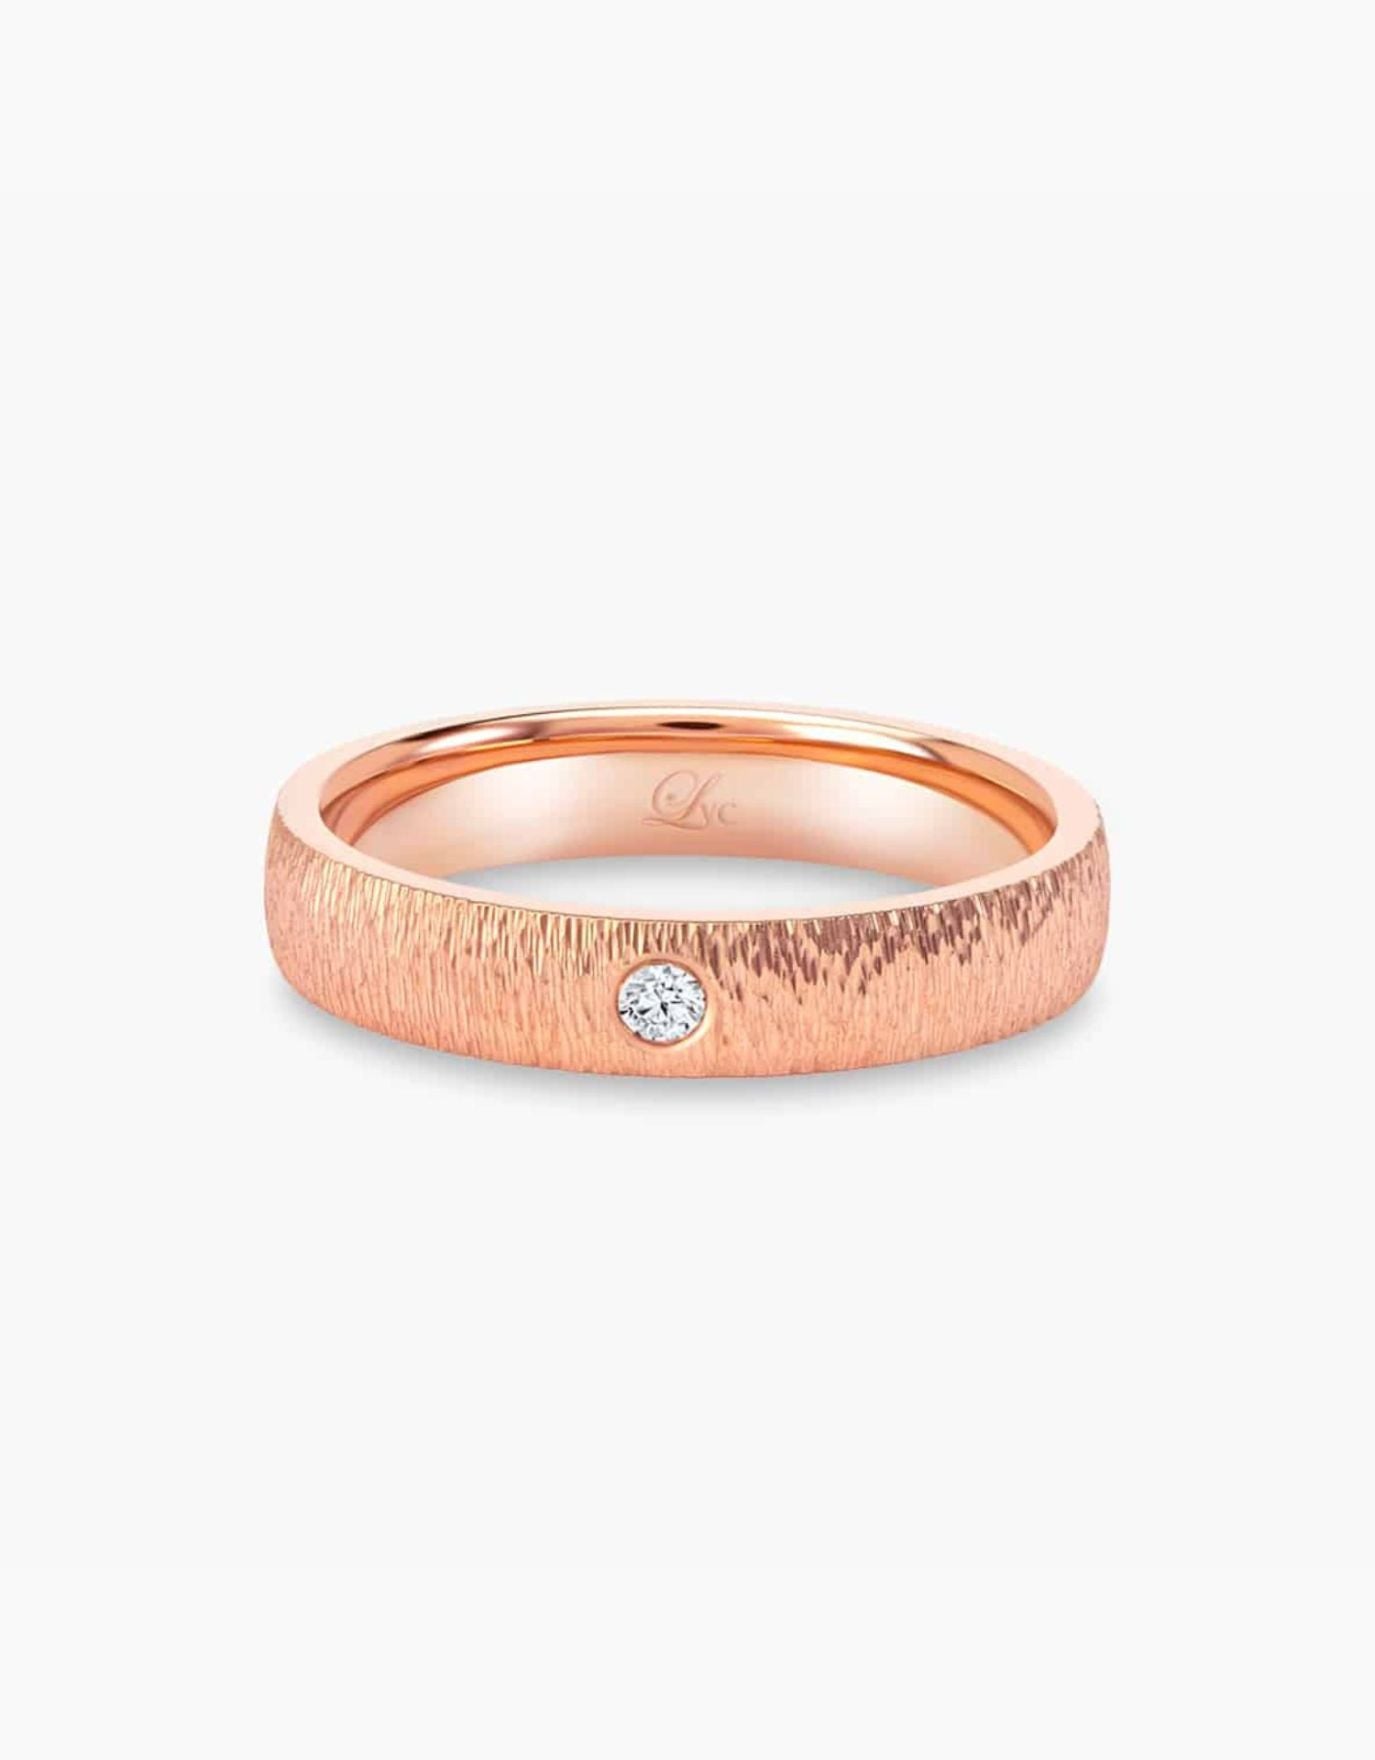 LVC Soleil Wedding Band in Rose Gold with a Center Diamond